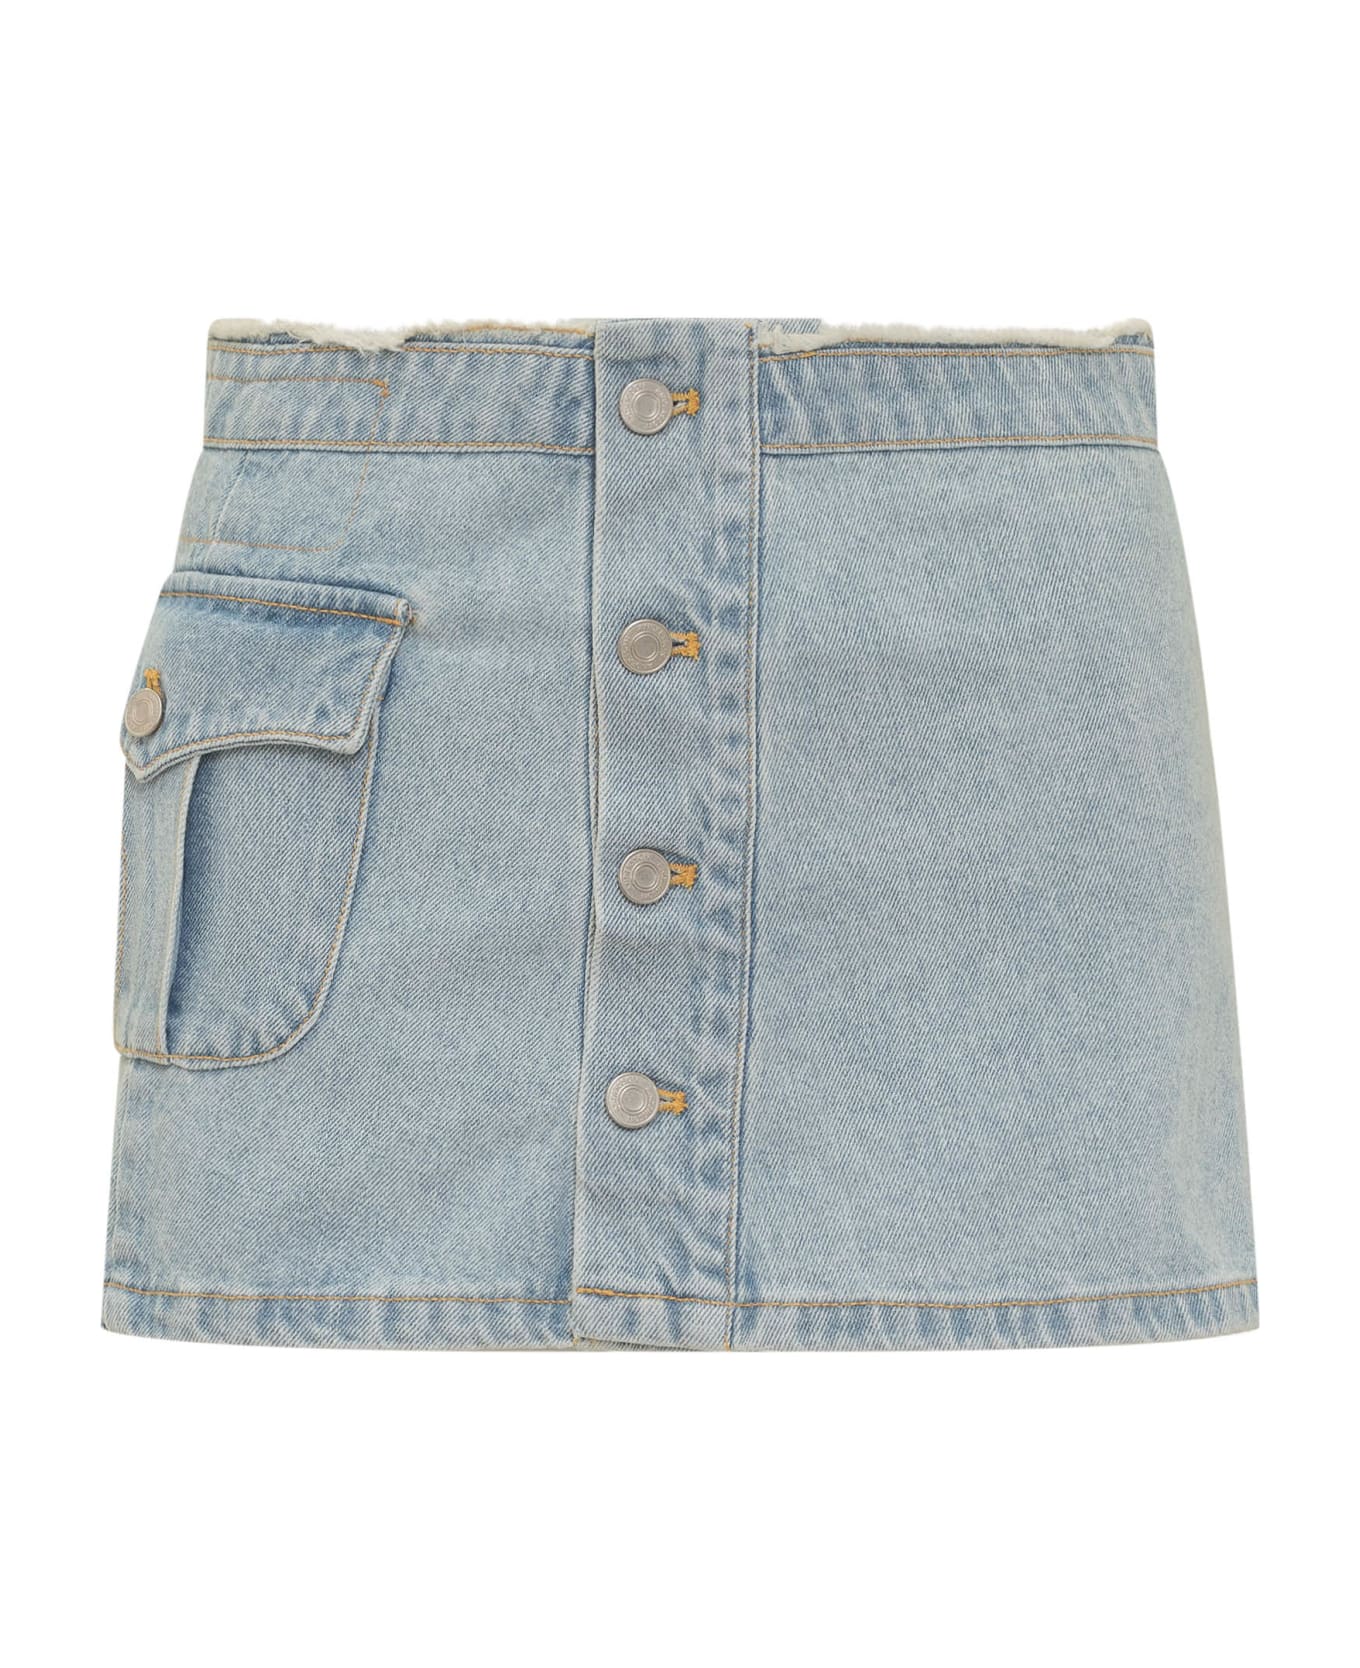 Andersson Bell Apron Mini Skirt - WASHED BLUE スカート